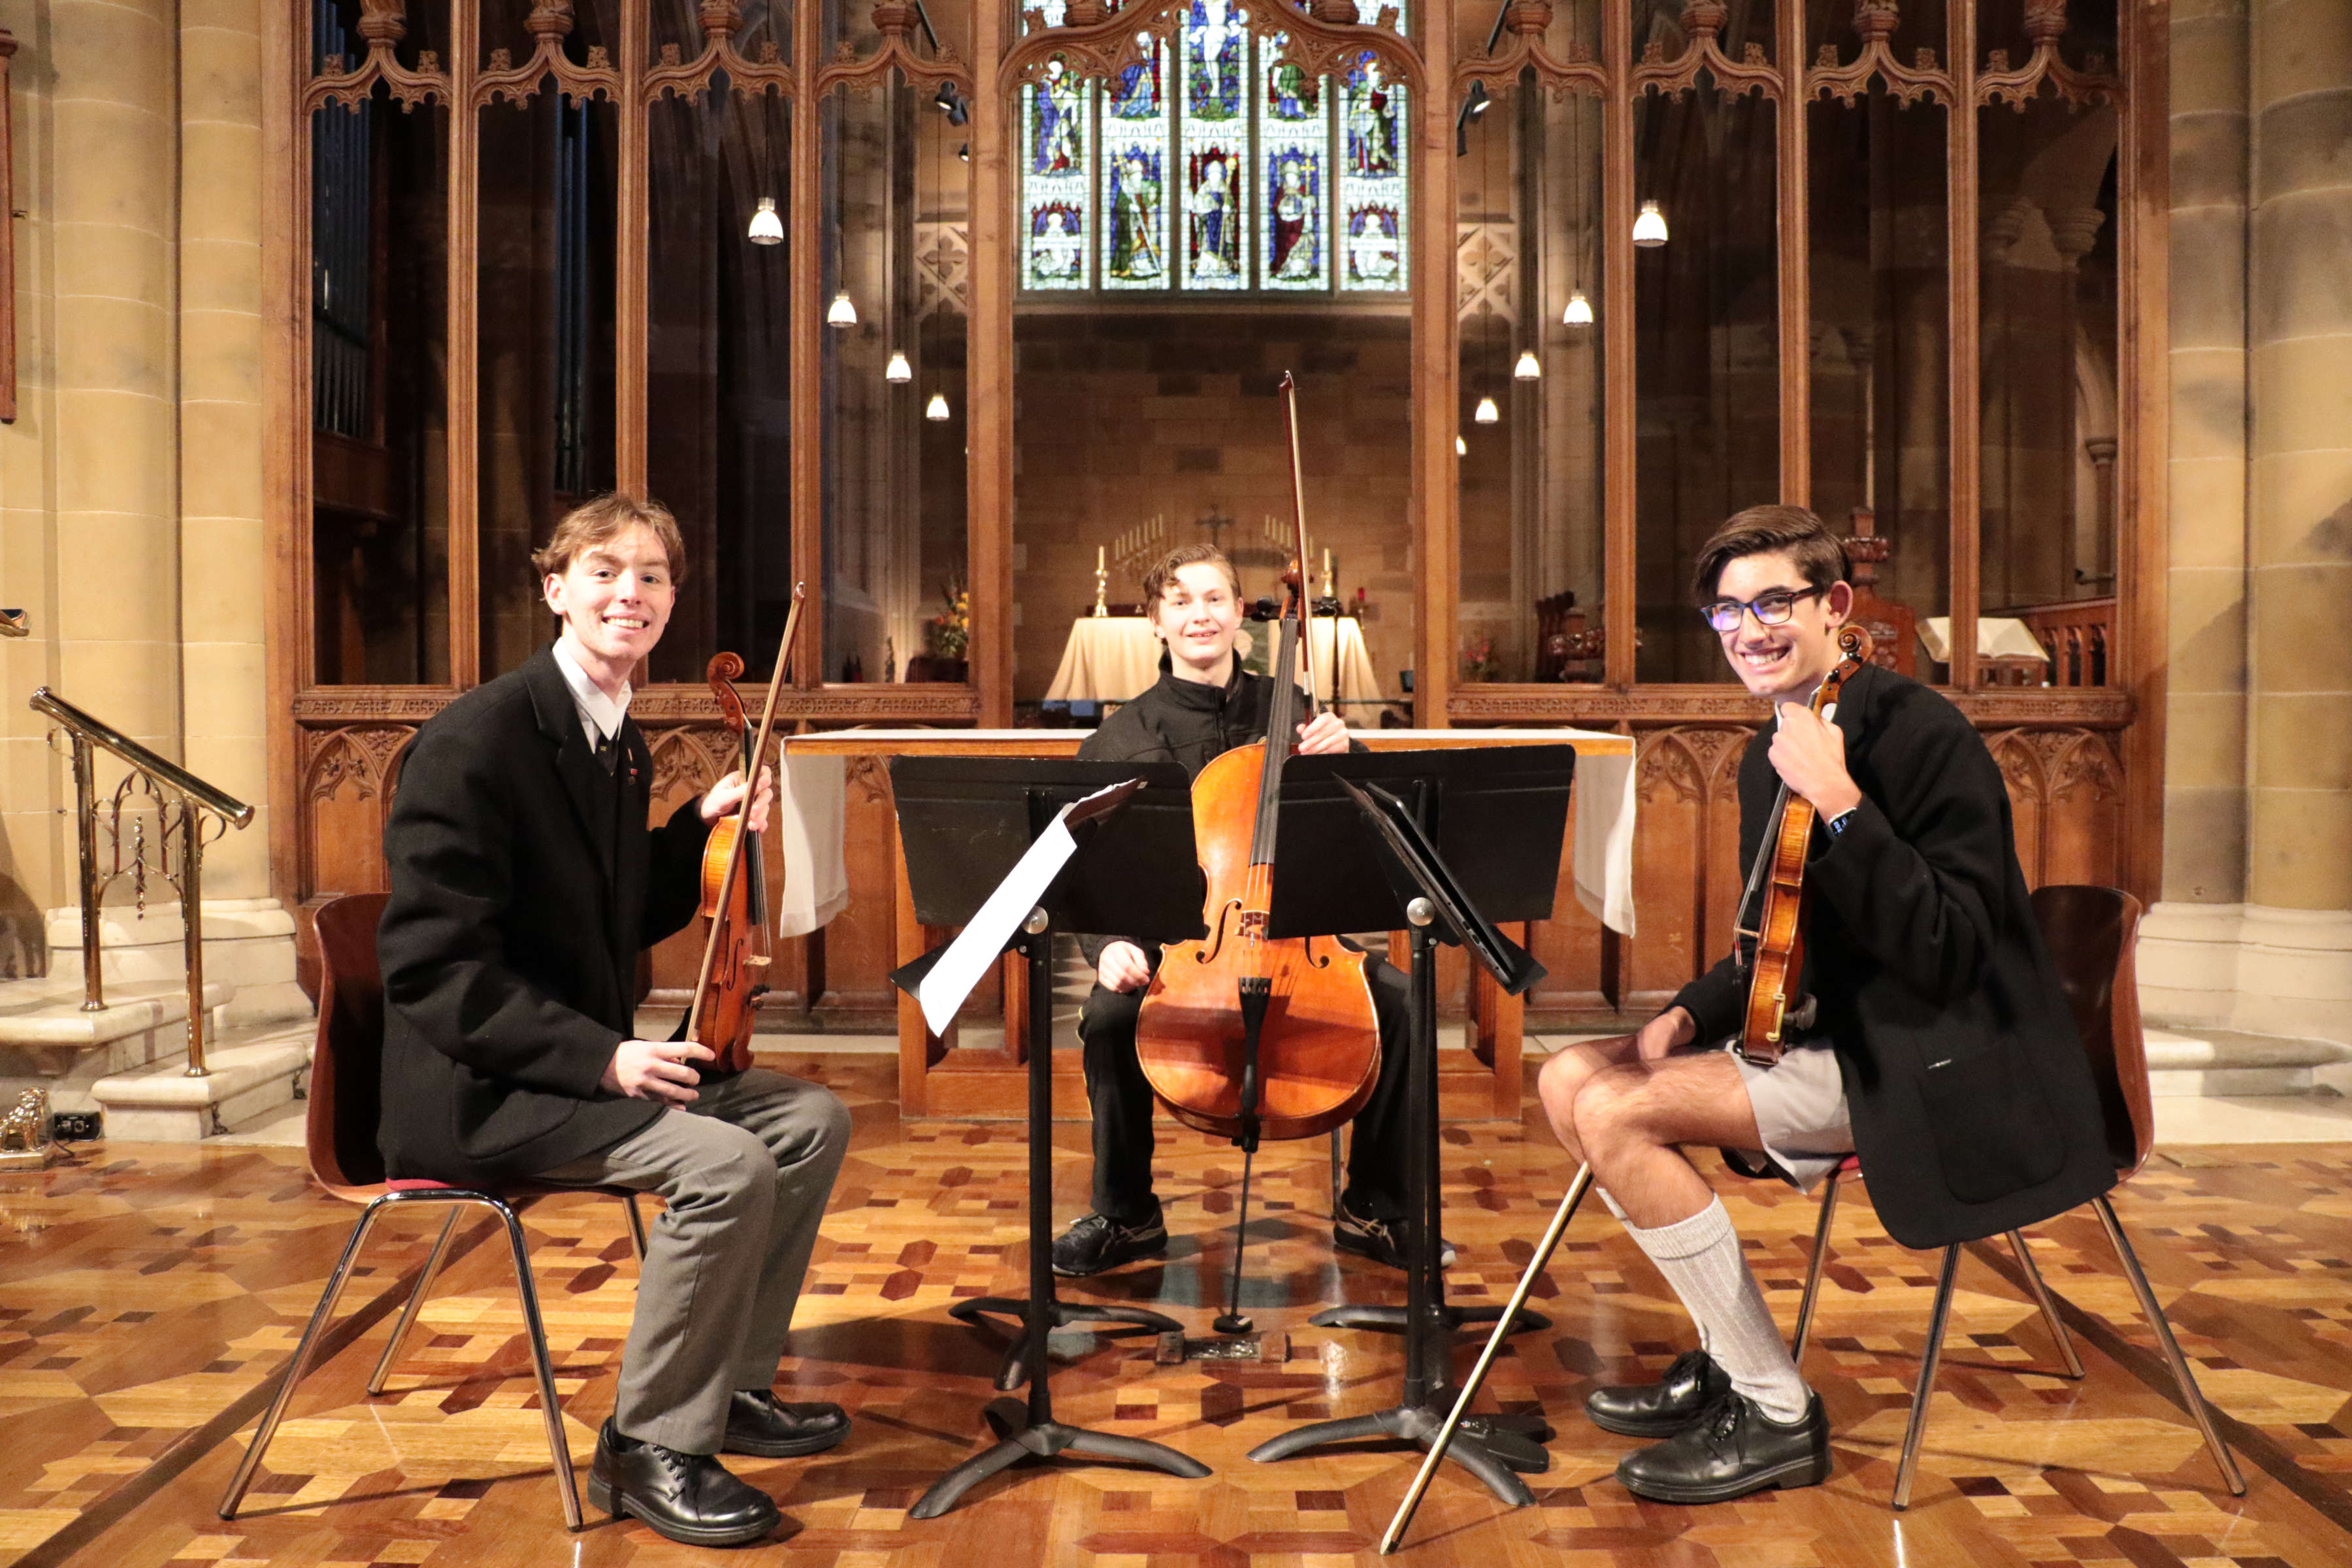 Hutchins Strings Trio perform during a lunchtime concert at St David’s Cathedral. Photo: Laura Bird.